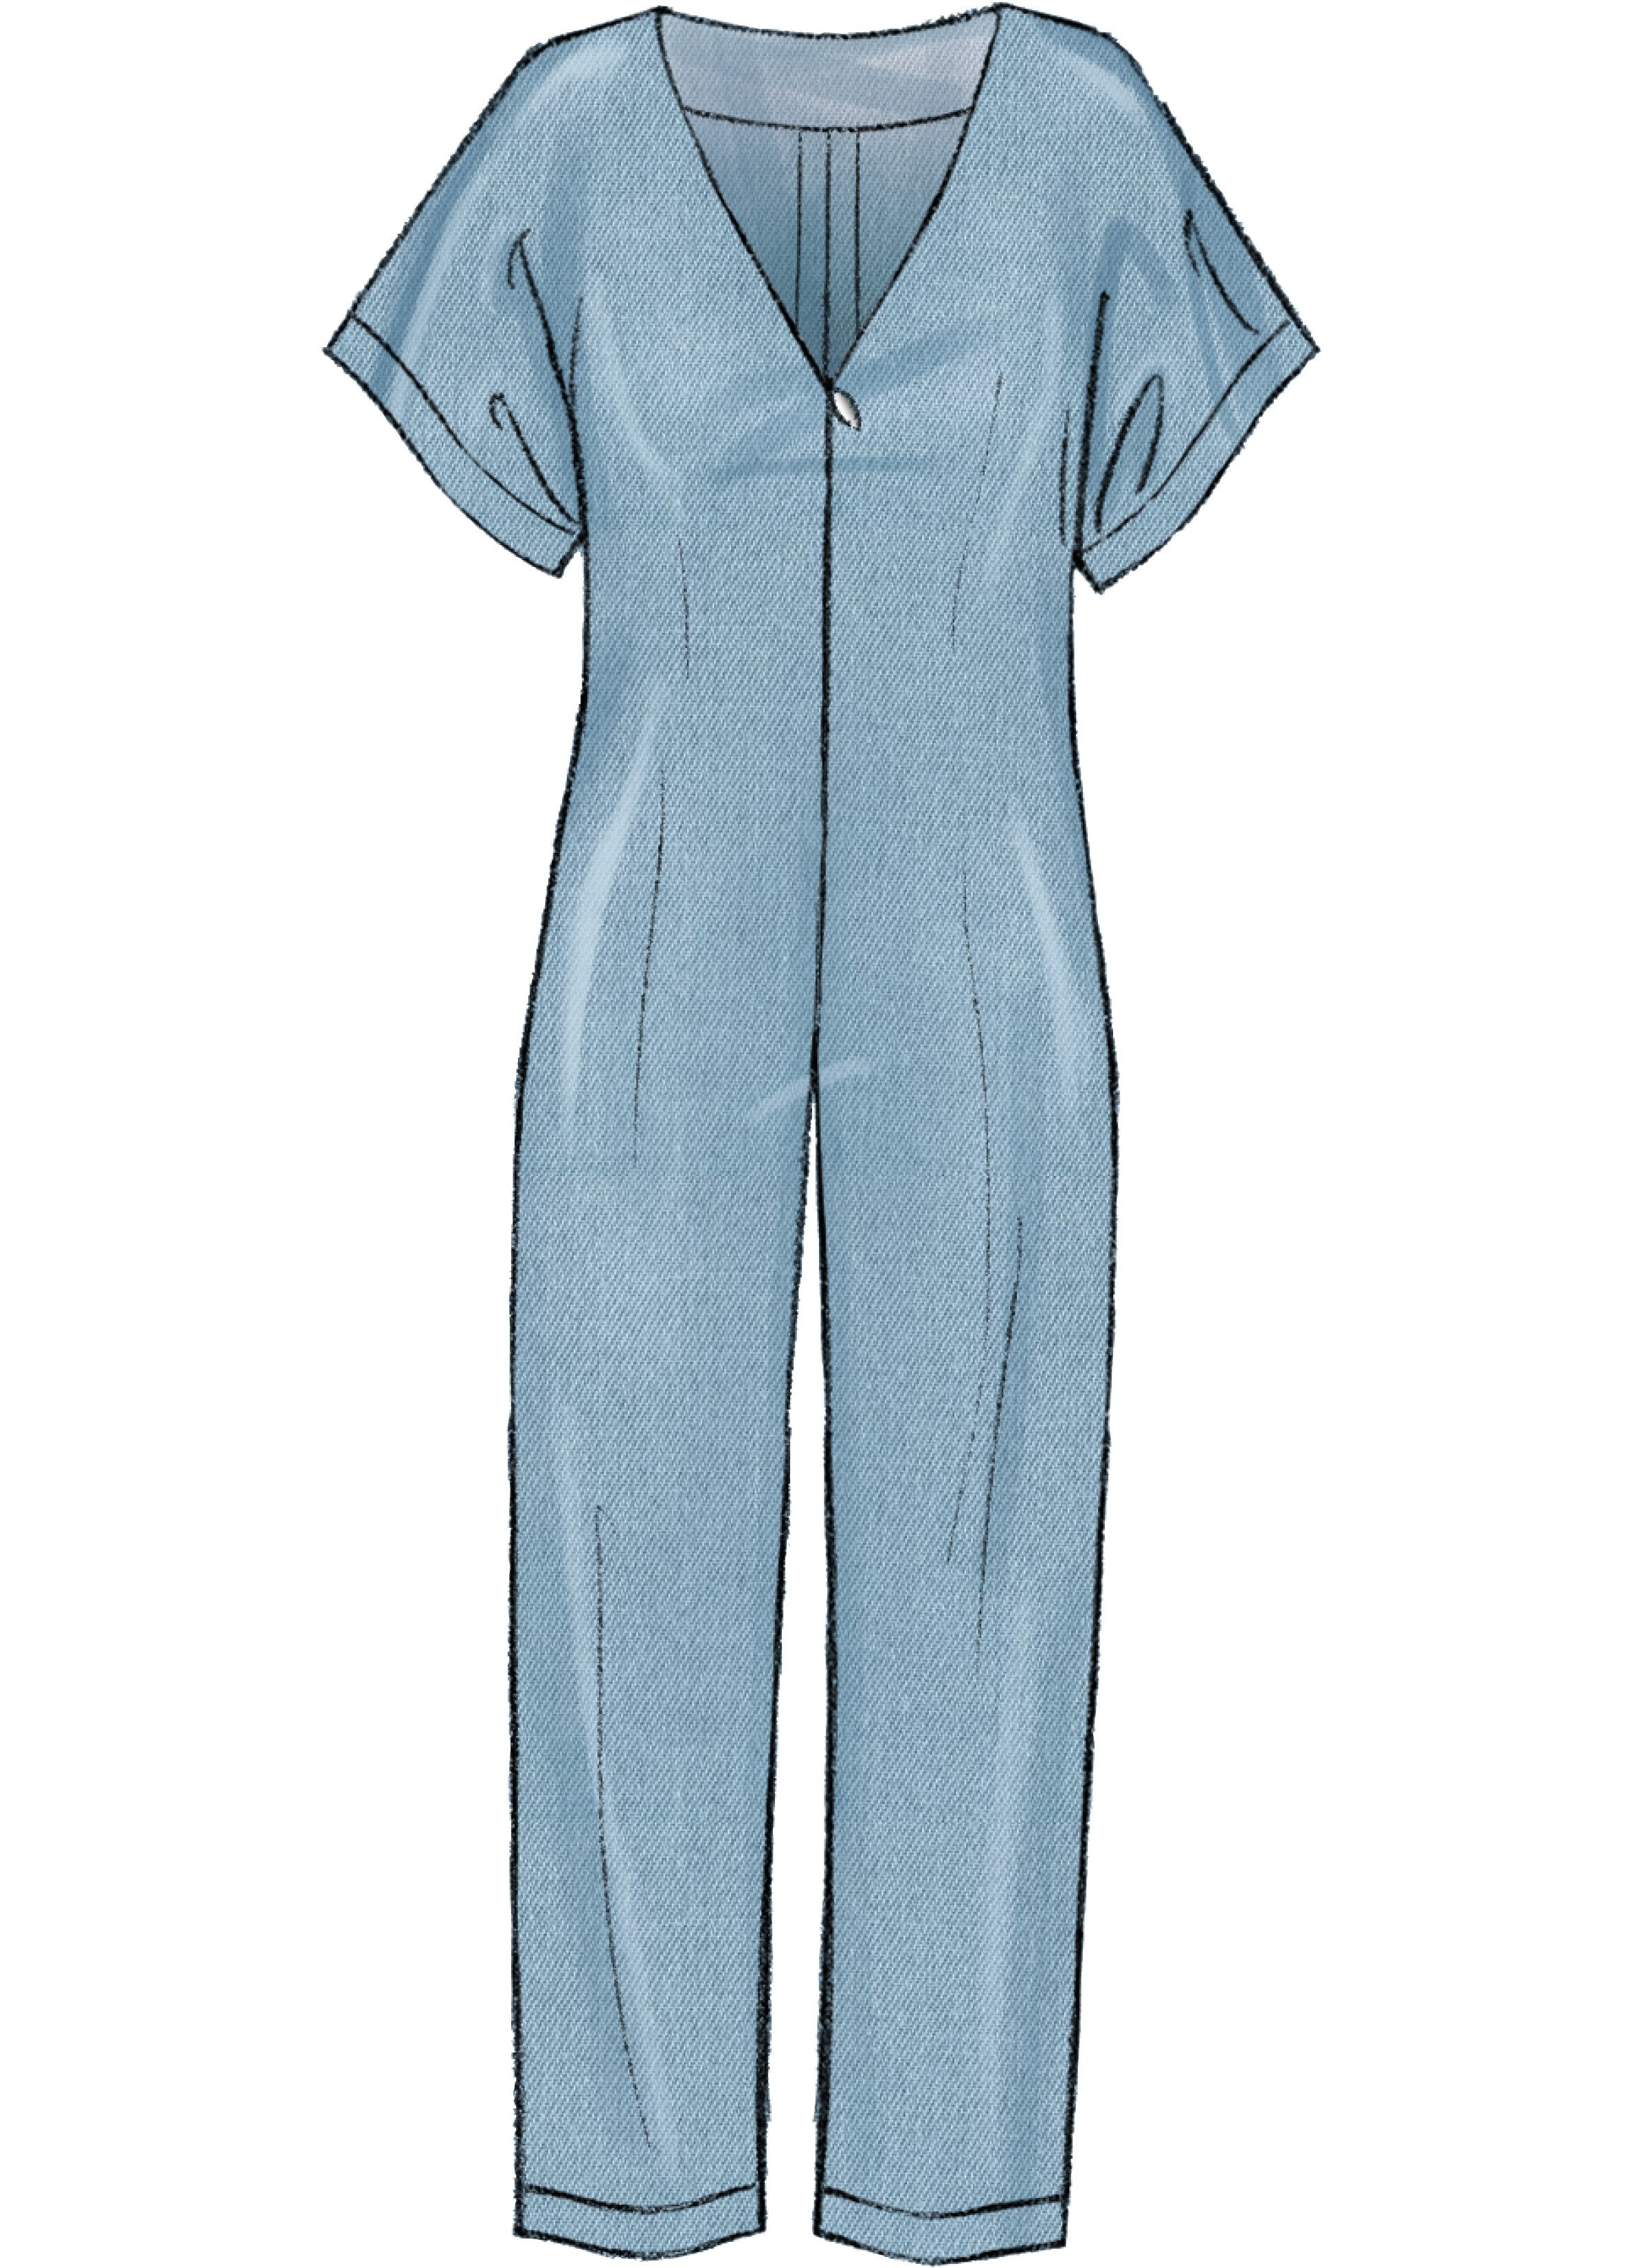 McCall's 7936 Misses'/Miss Petite Romper, Jumpsuit Pattern from Jaycotts Sewing Supplies